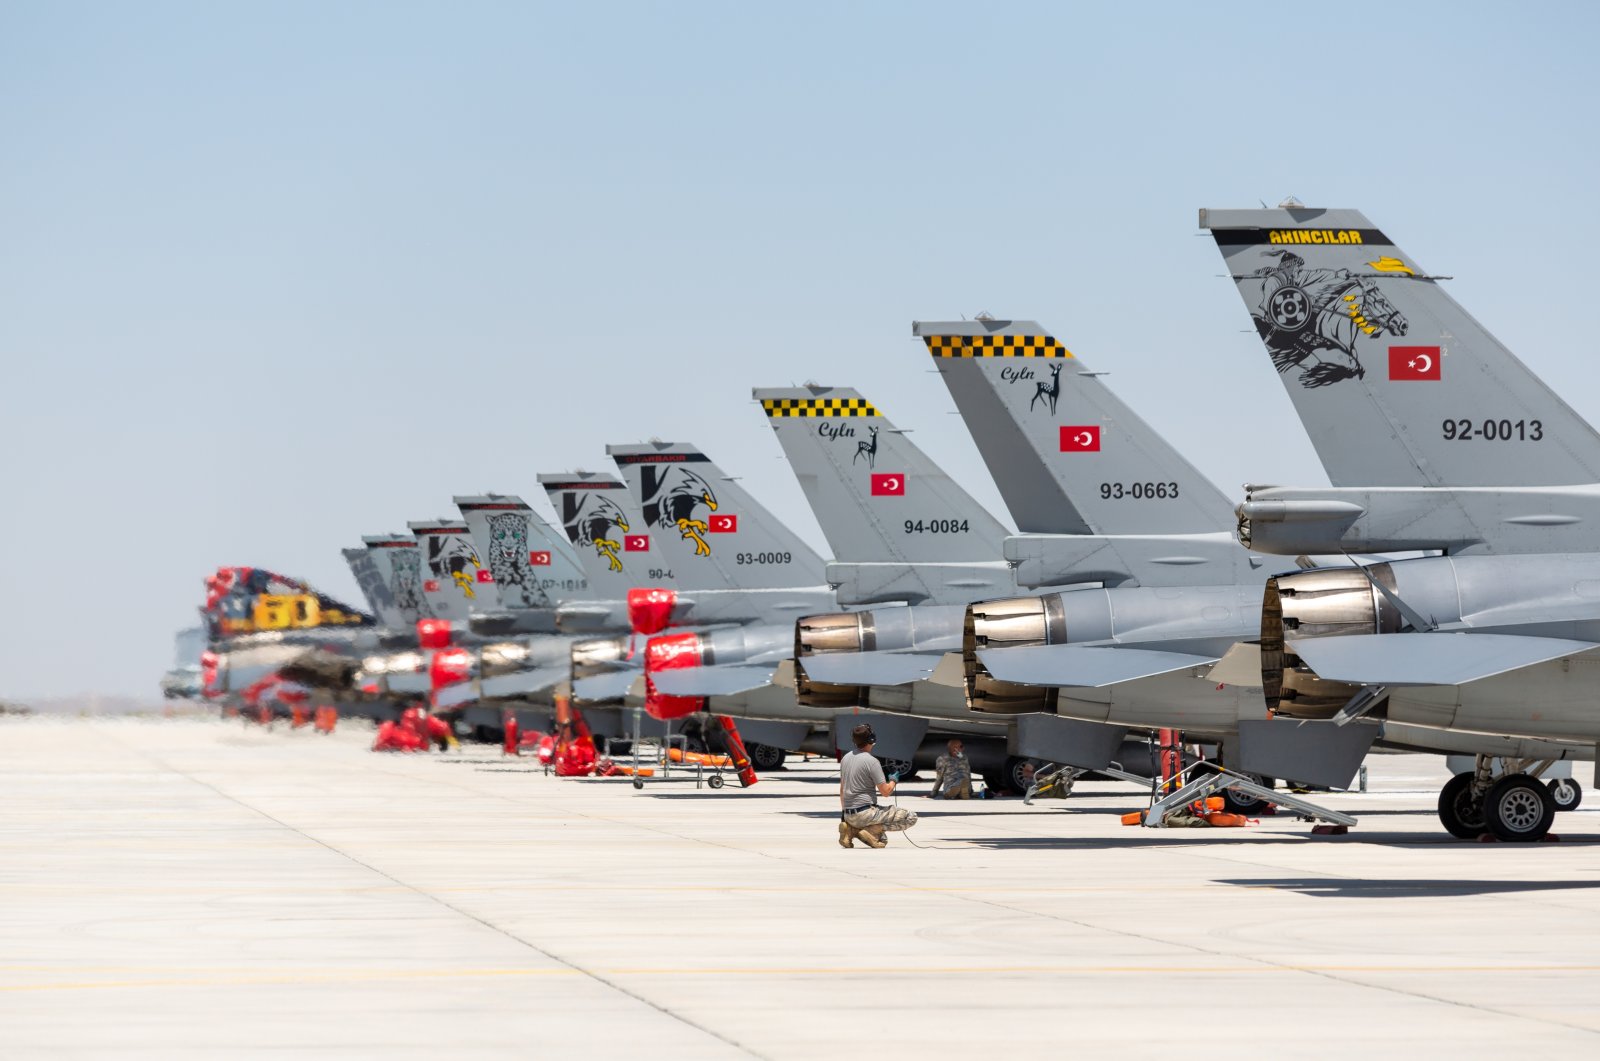 F-16 fighter jets in a taxiing position during the Anatolian Eagle Air Force Exercise 2021 in Türkiye, Jan. 7, 2021. (Shutterstock File Photo)